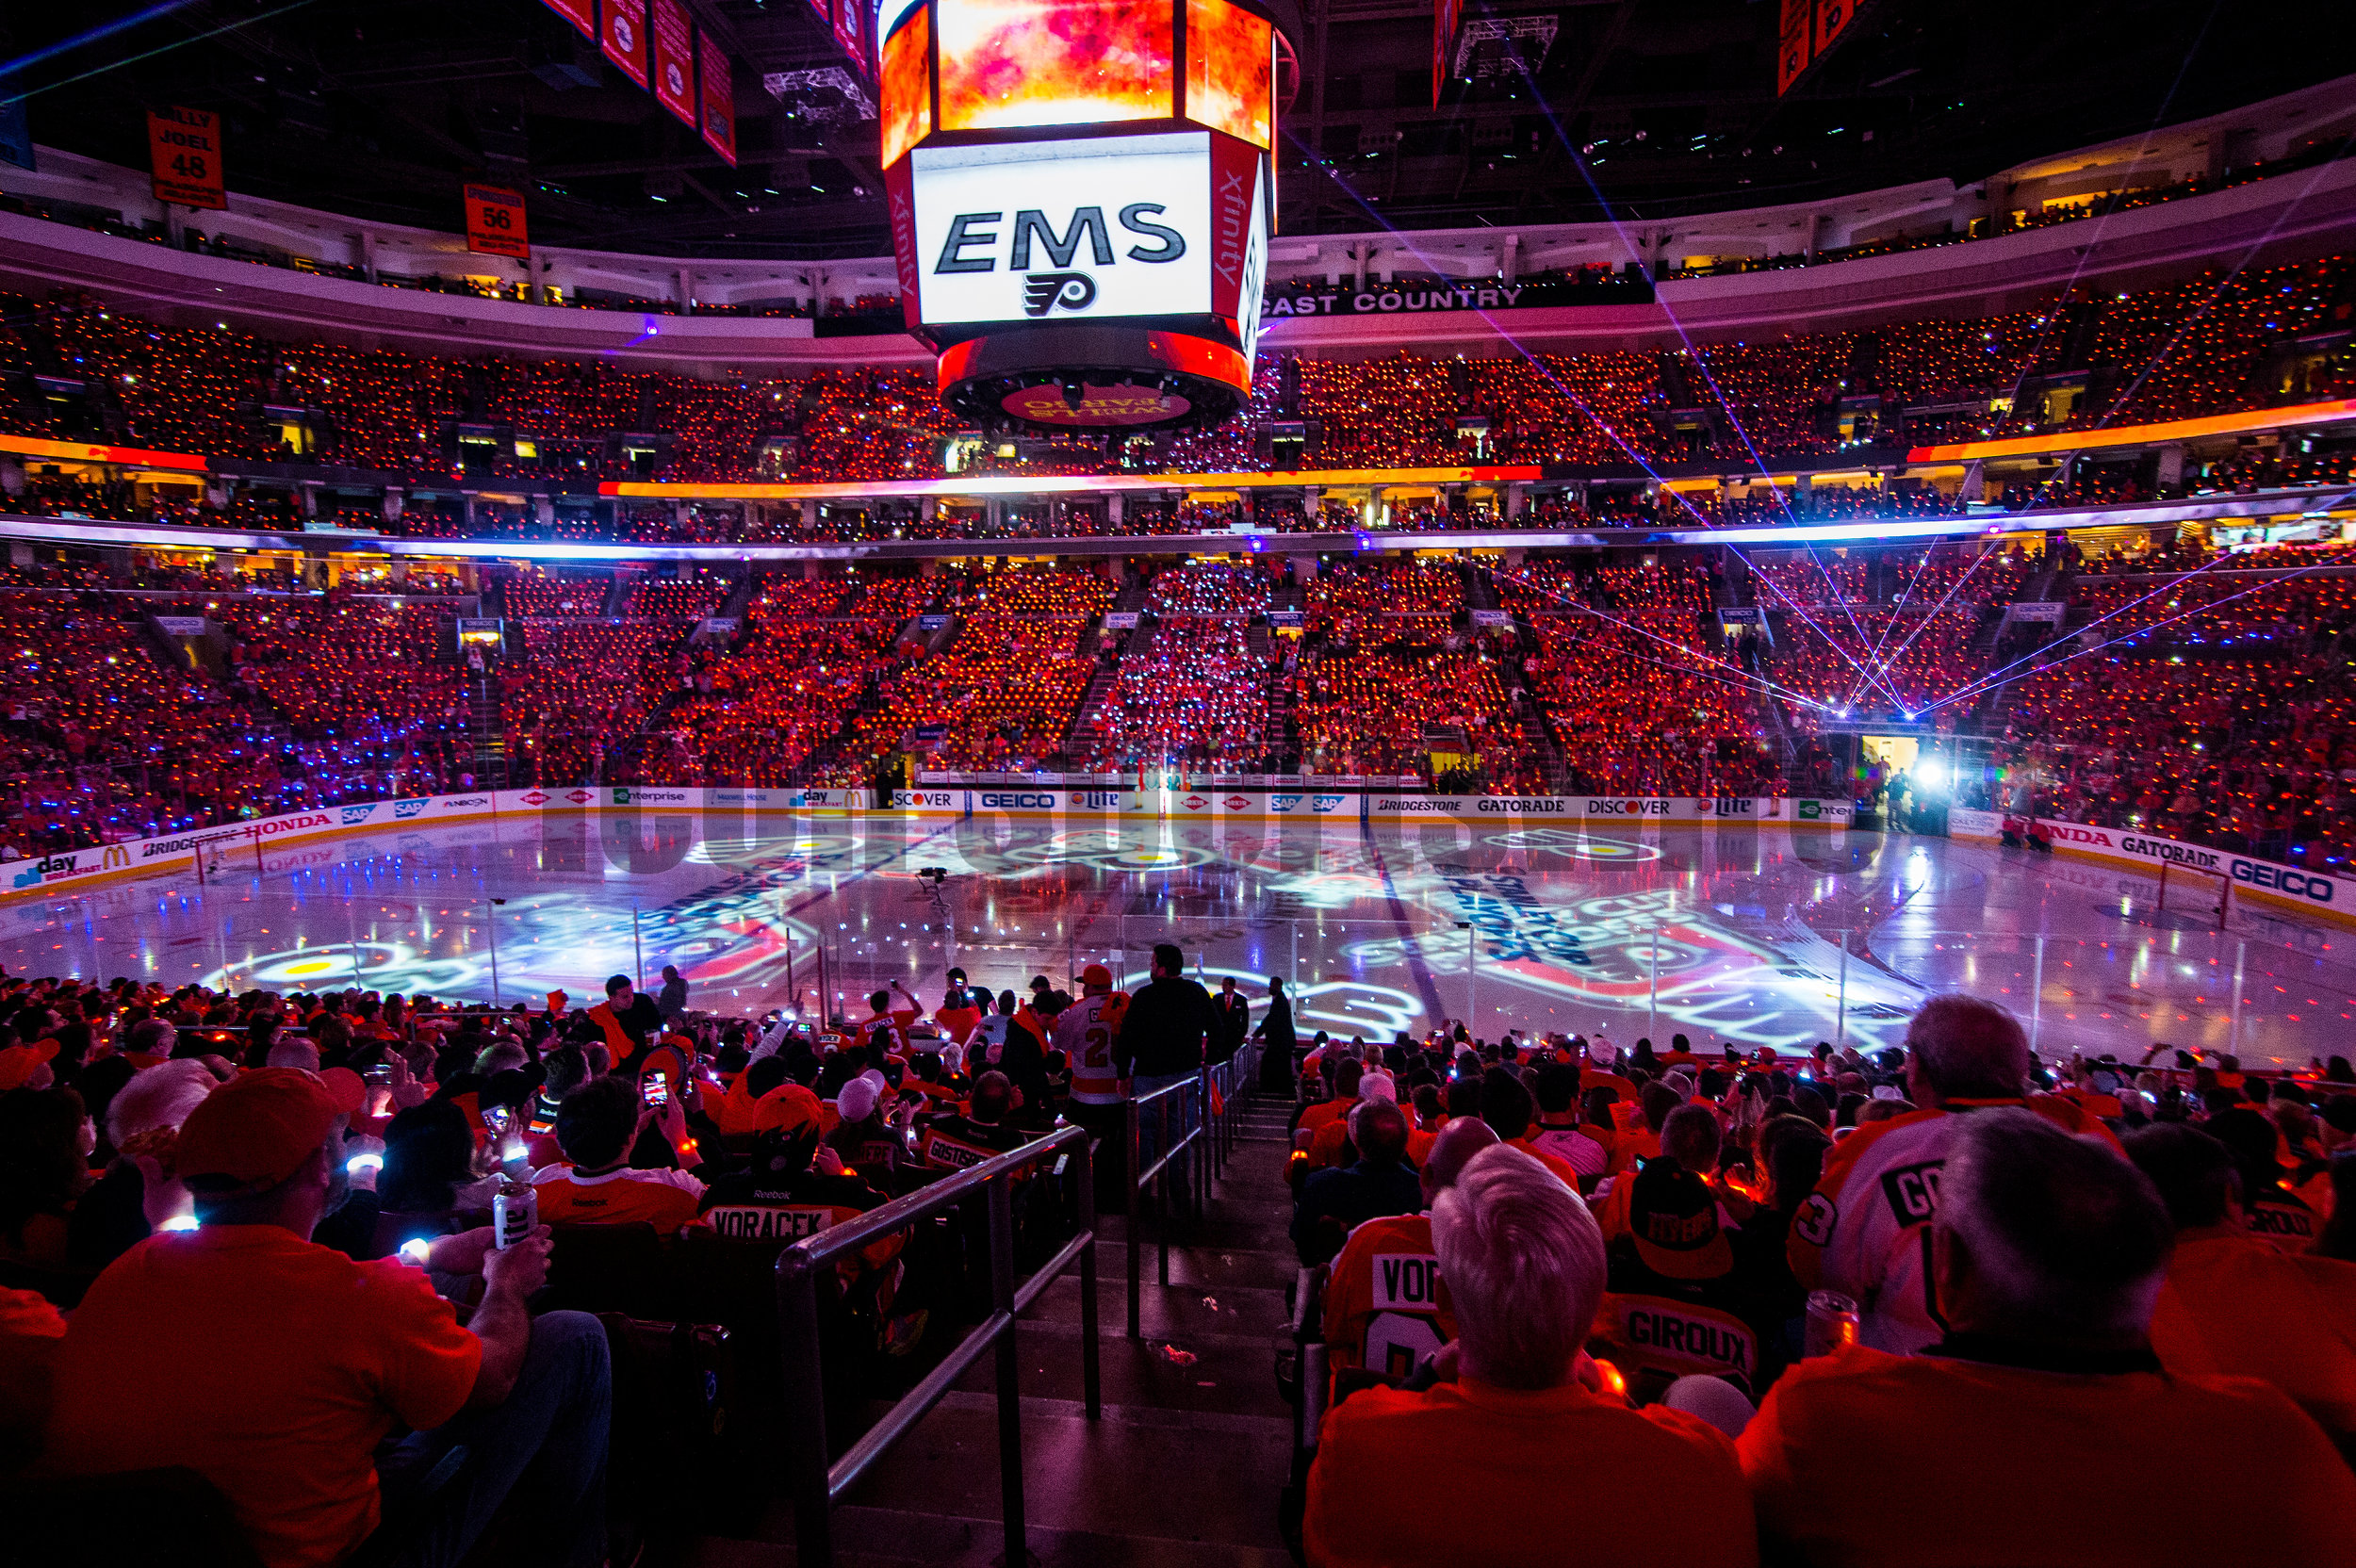  18 April 2016: Pre-game laser show before the NHL playoff game between the Philadelphia Flyers and the Washington Capitals played at the Wells Fargo Center in Philadelphia, PA. (Photo by Gavin Baker/Icon Sportswire) 